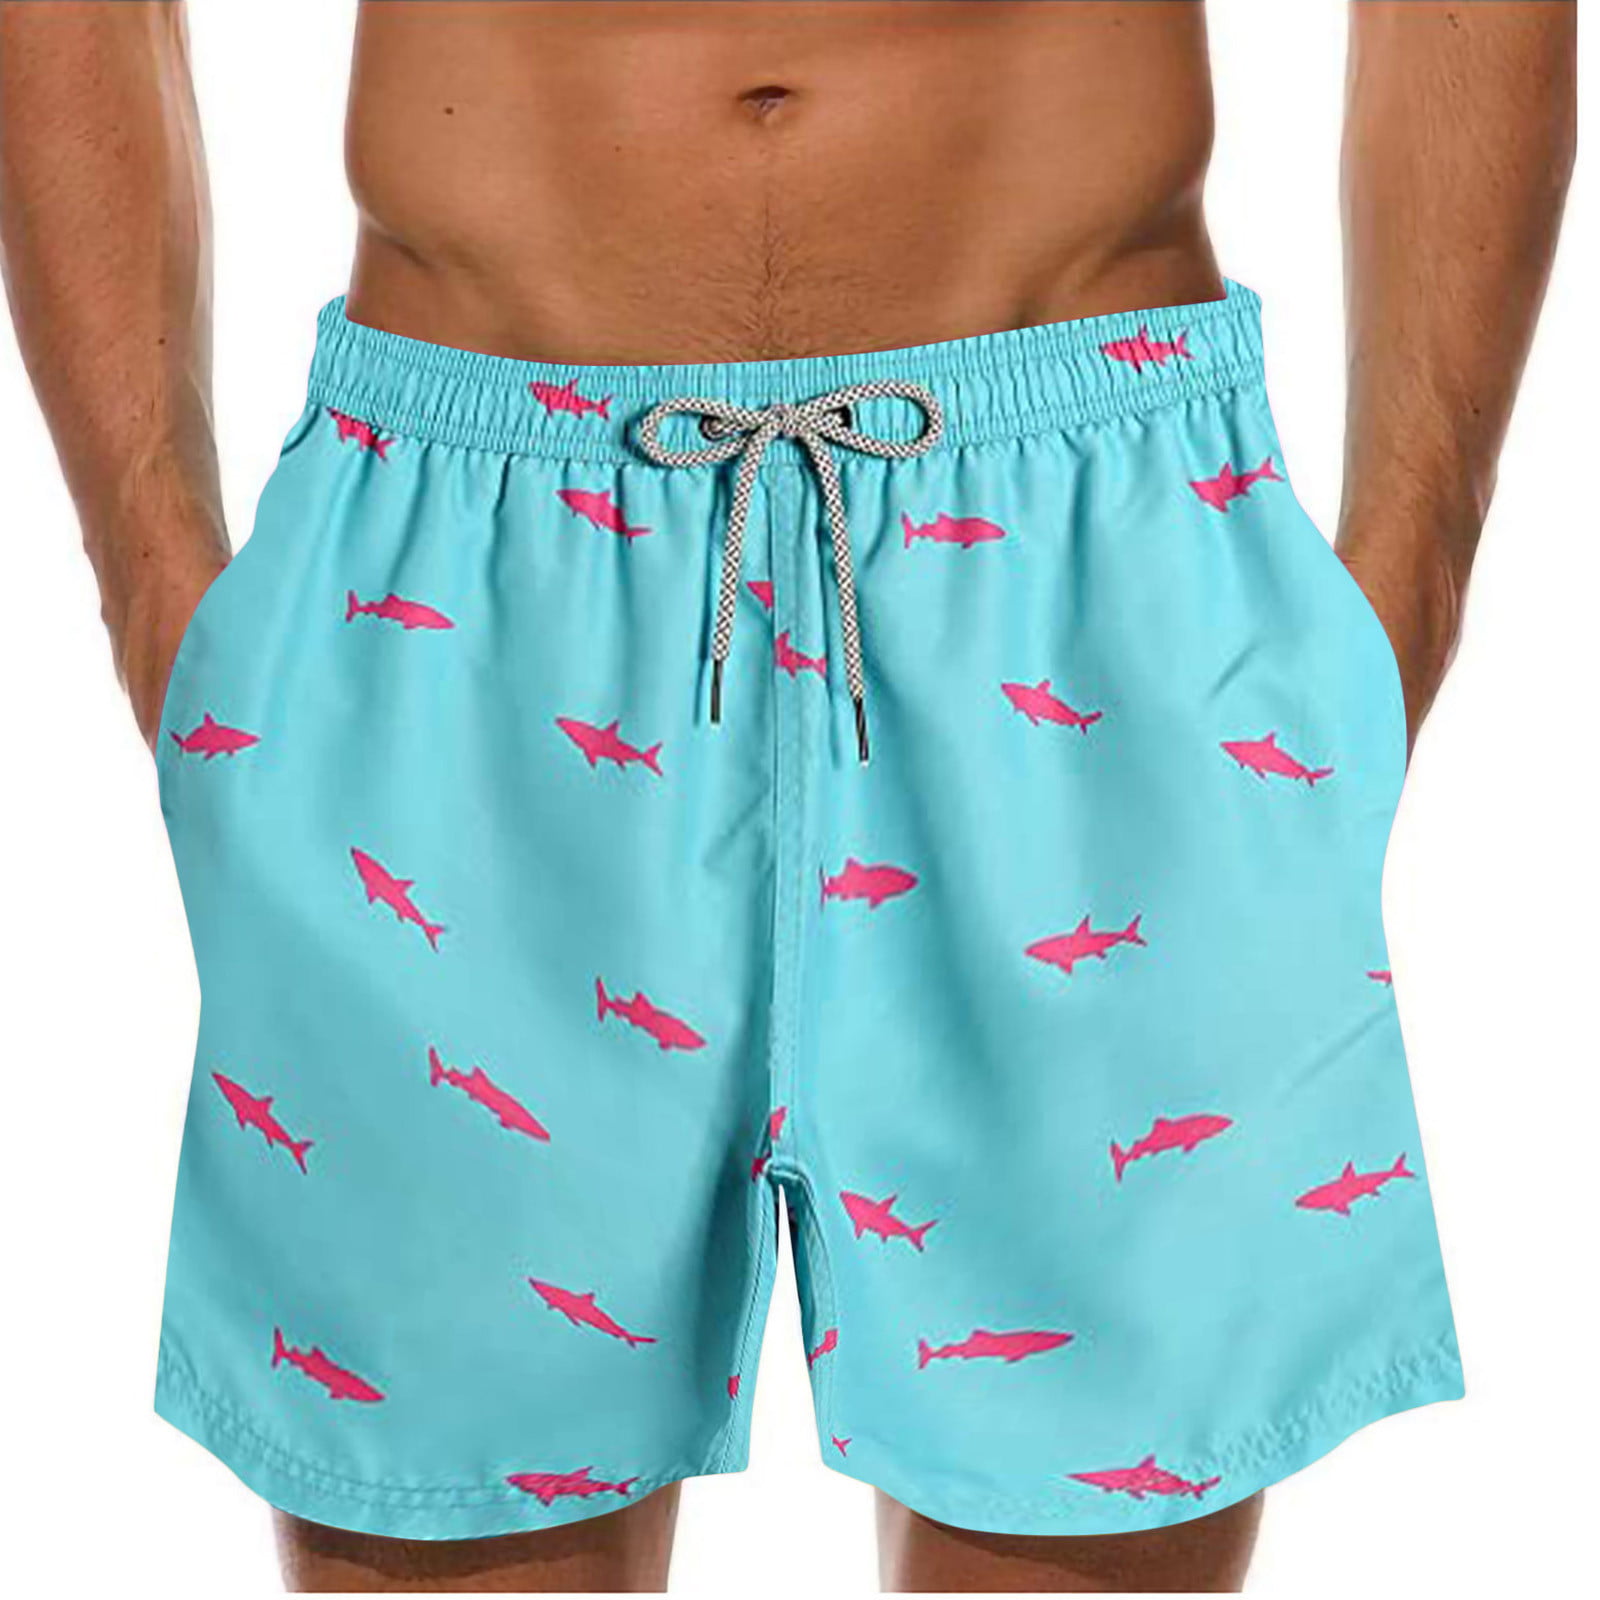 Pig and Bacon Pattern Mans Swim Trunks Training Stretch Board Shorts 